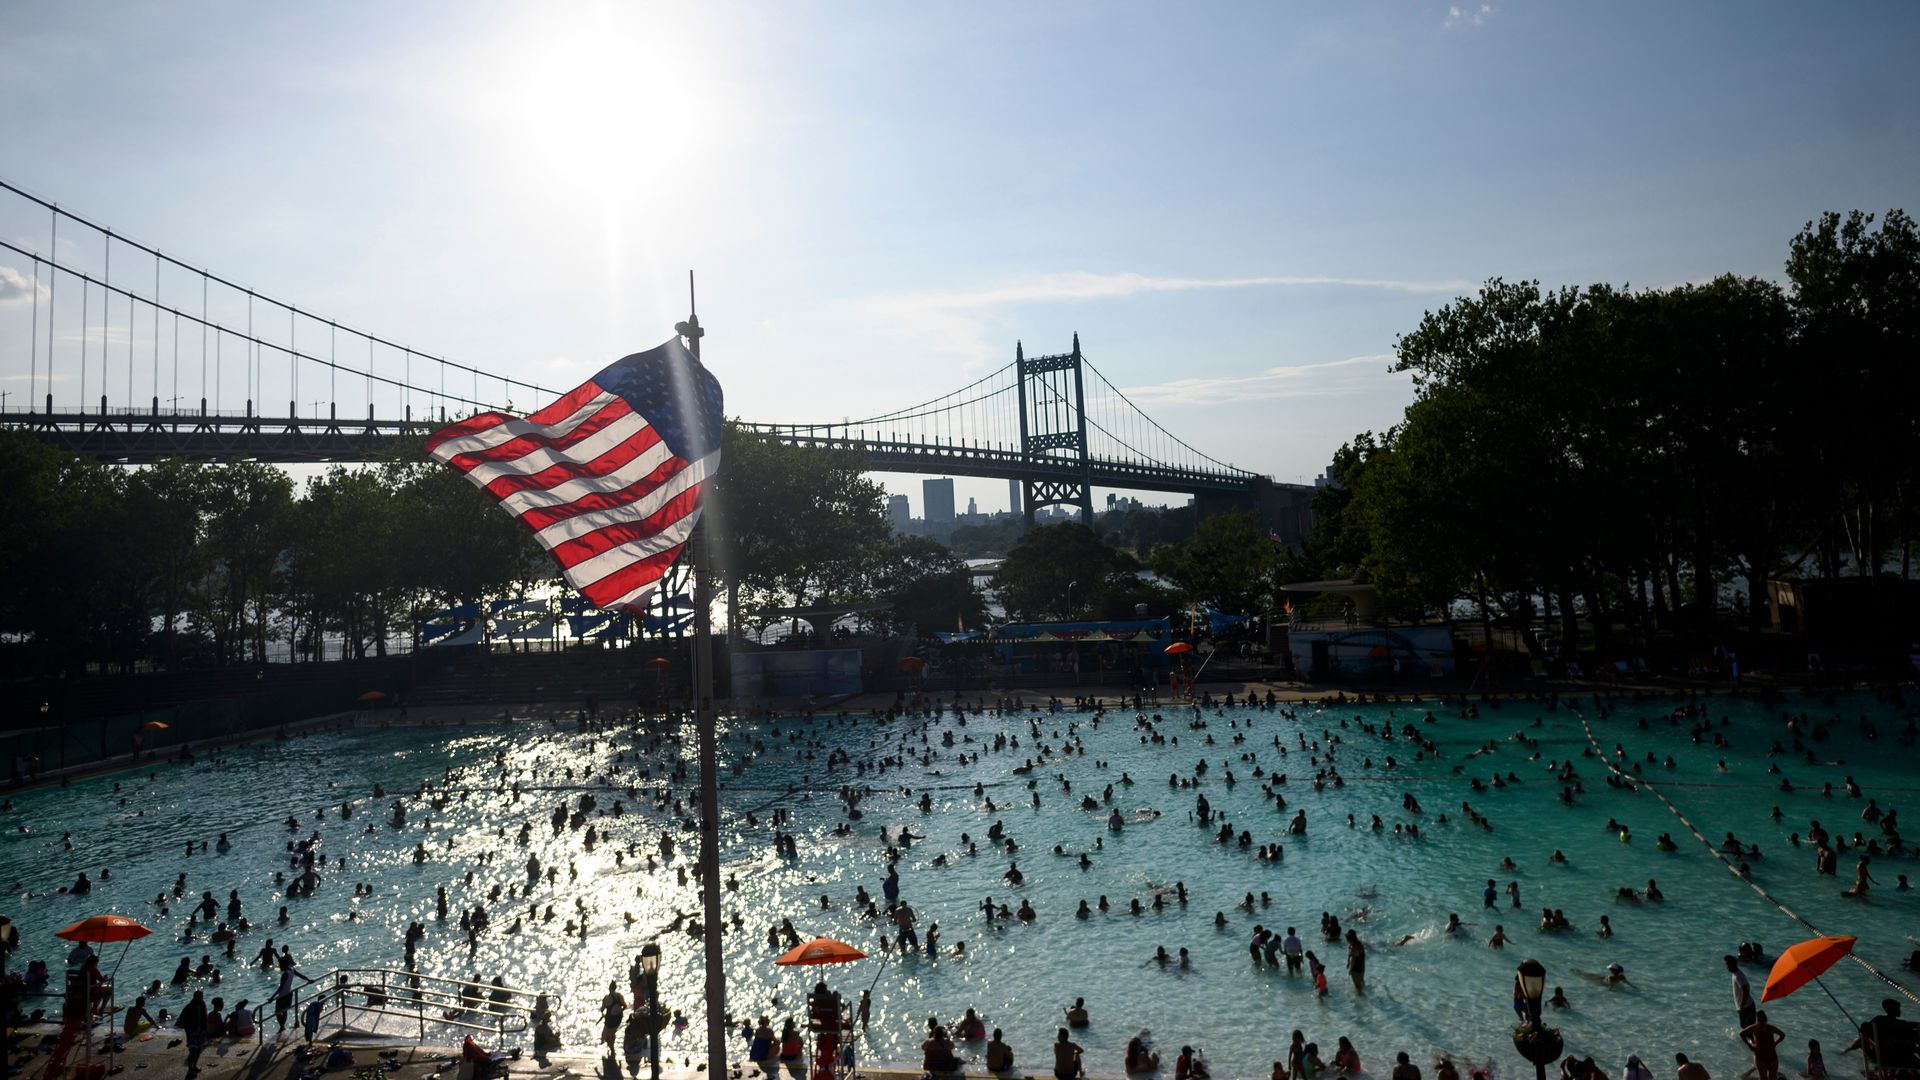 A US flag flies overhead as people enjoy the Astoria Pool on a hot afternoon in the borough of Queens, New York City, on July 20.